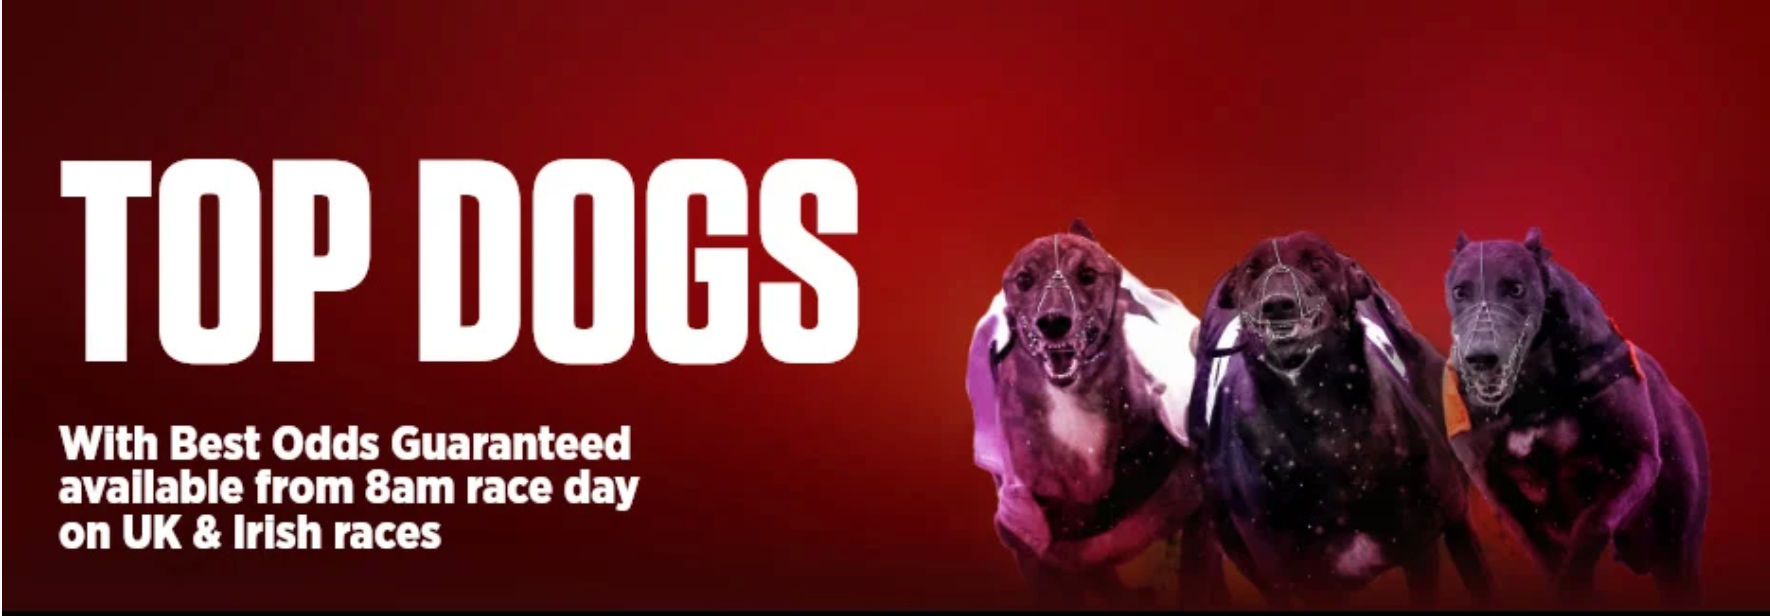 Ladbrokes Best odds on Greyhounds up to £/€2500